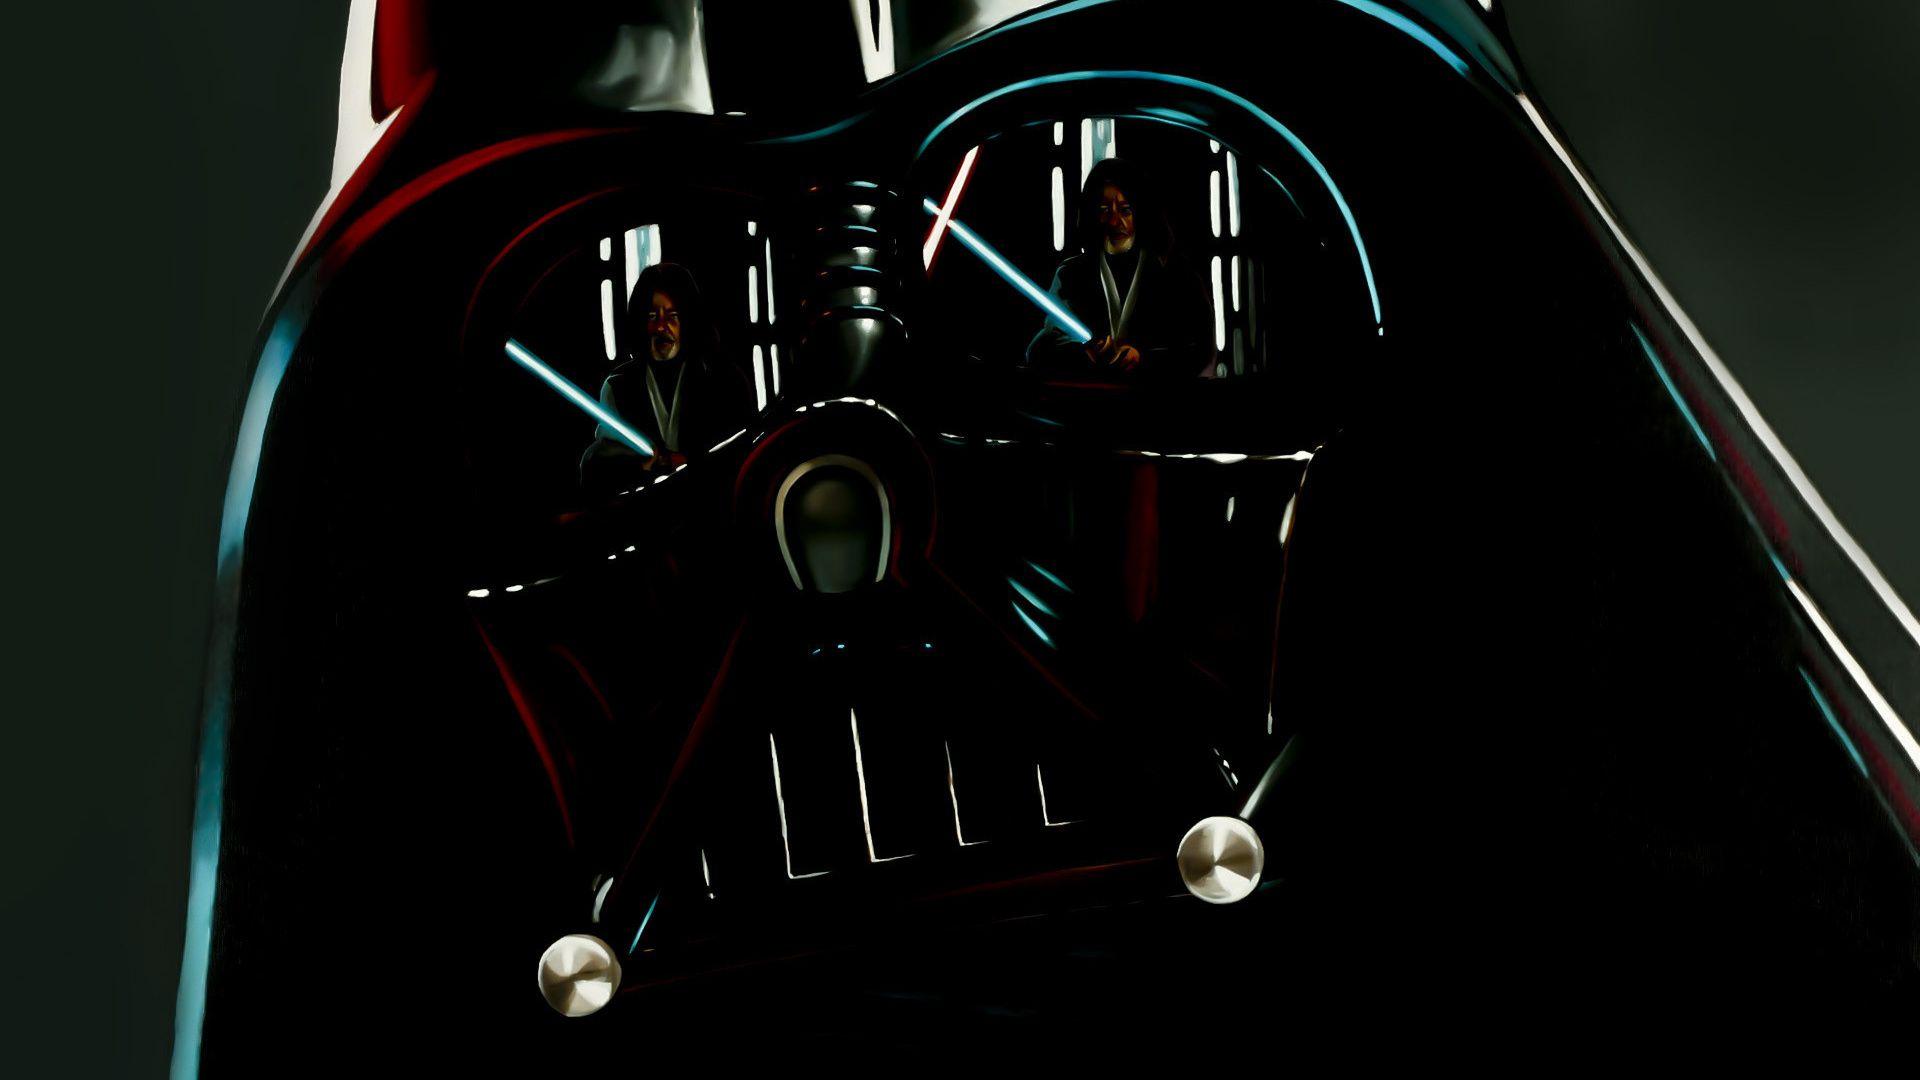 Reflection, Star Wars, Darth Vader Wallpaper and Picture